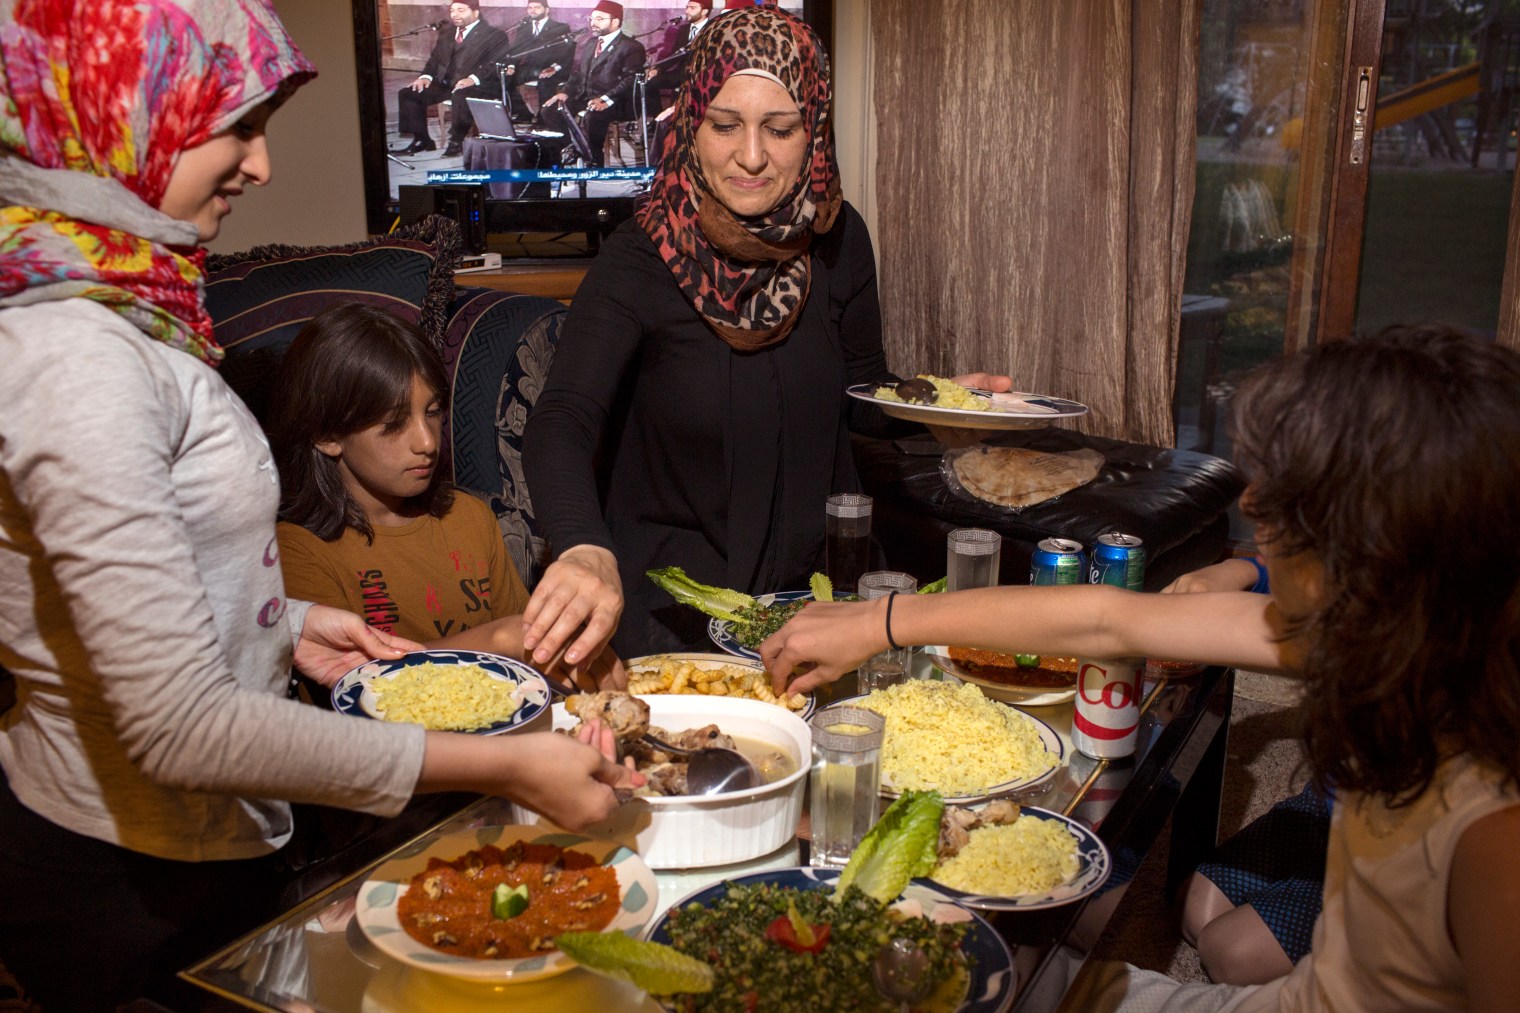 Ghazweh Aljabooli and her children eat together after breaking their fast during Ramadan at their apartment in West Des Moines, Iowa.